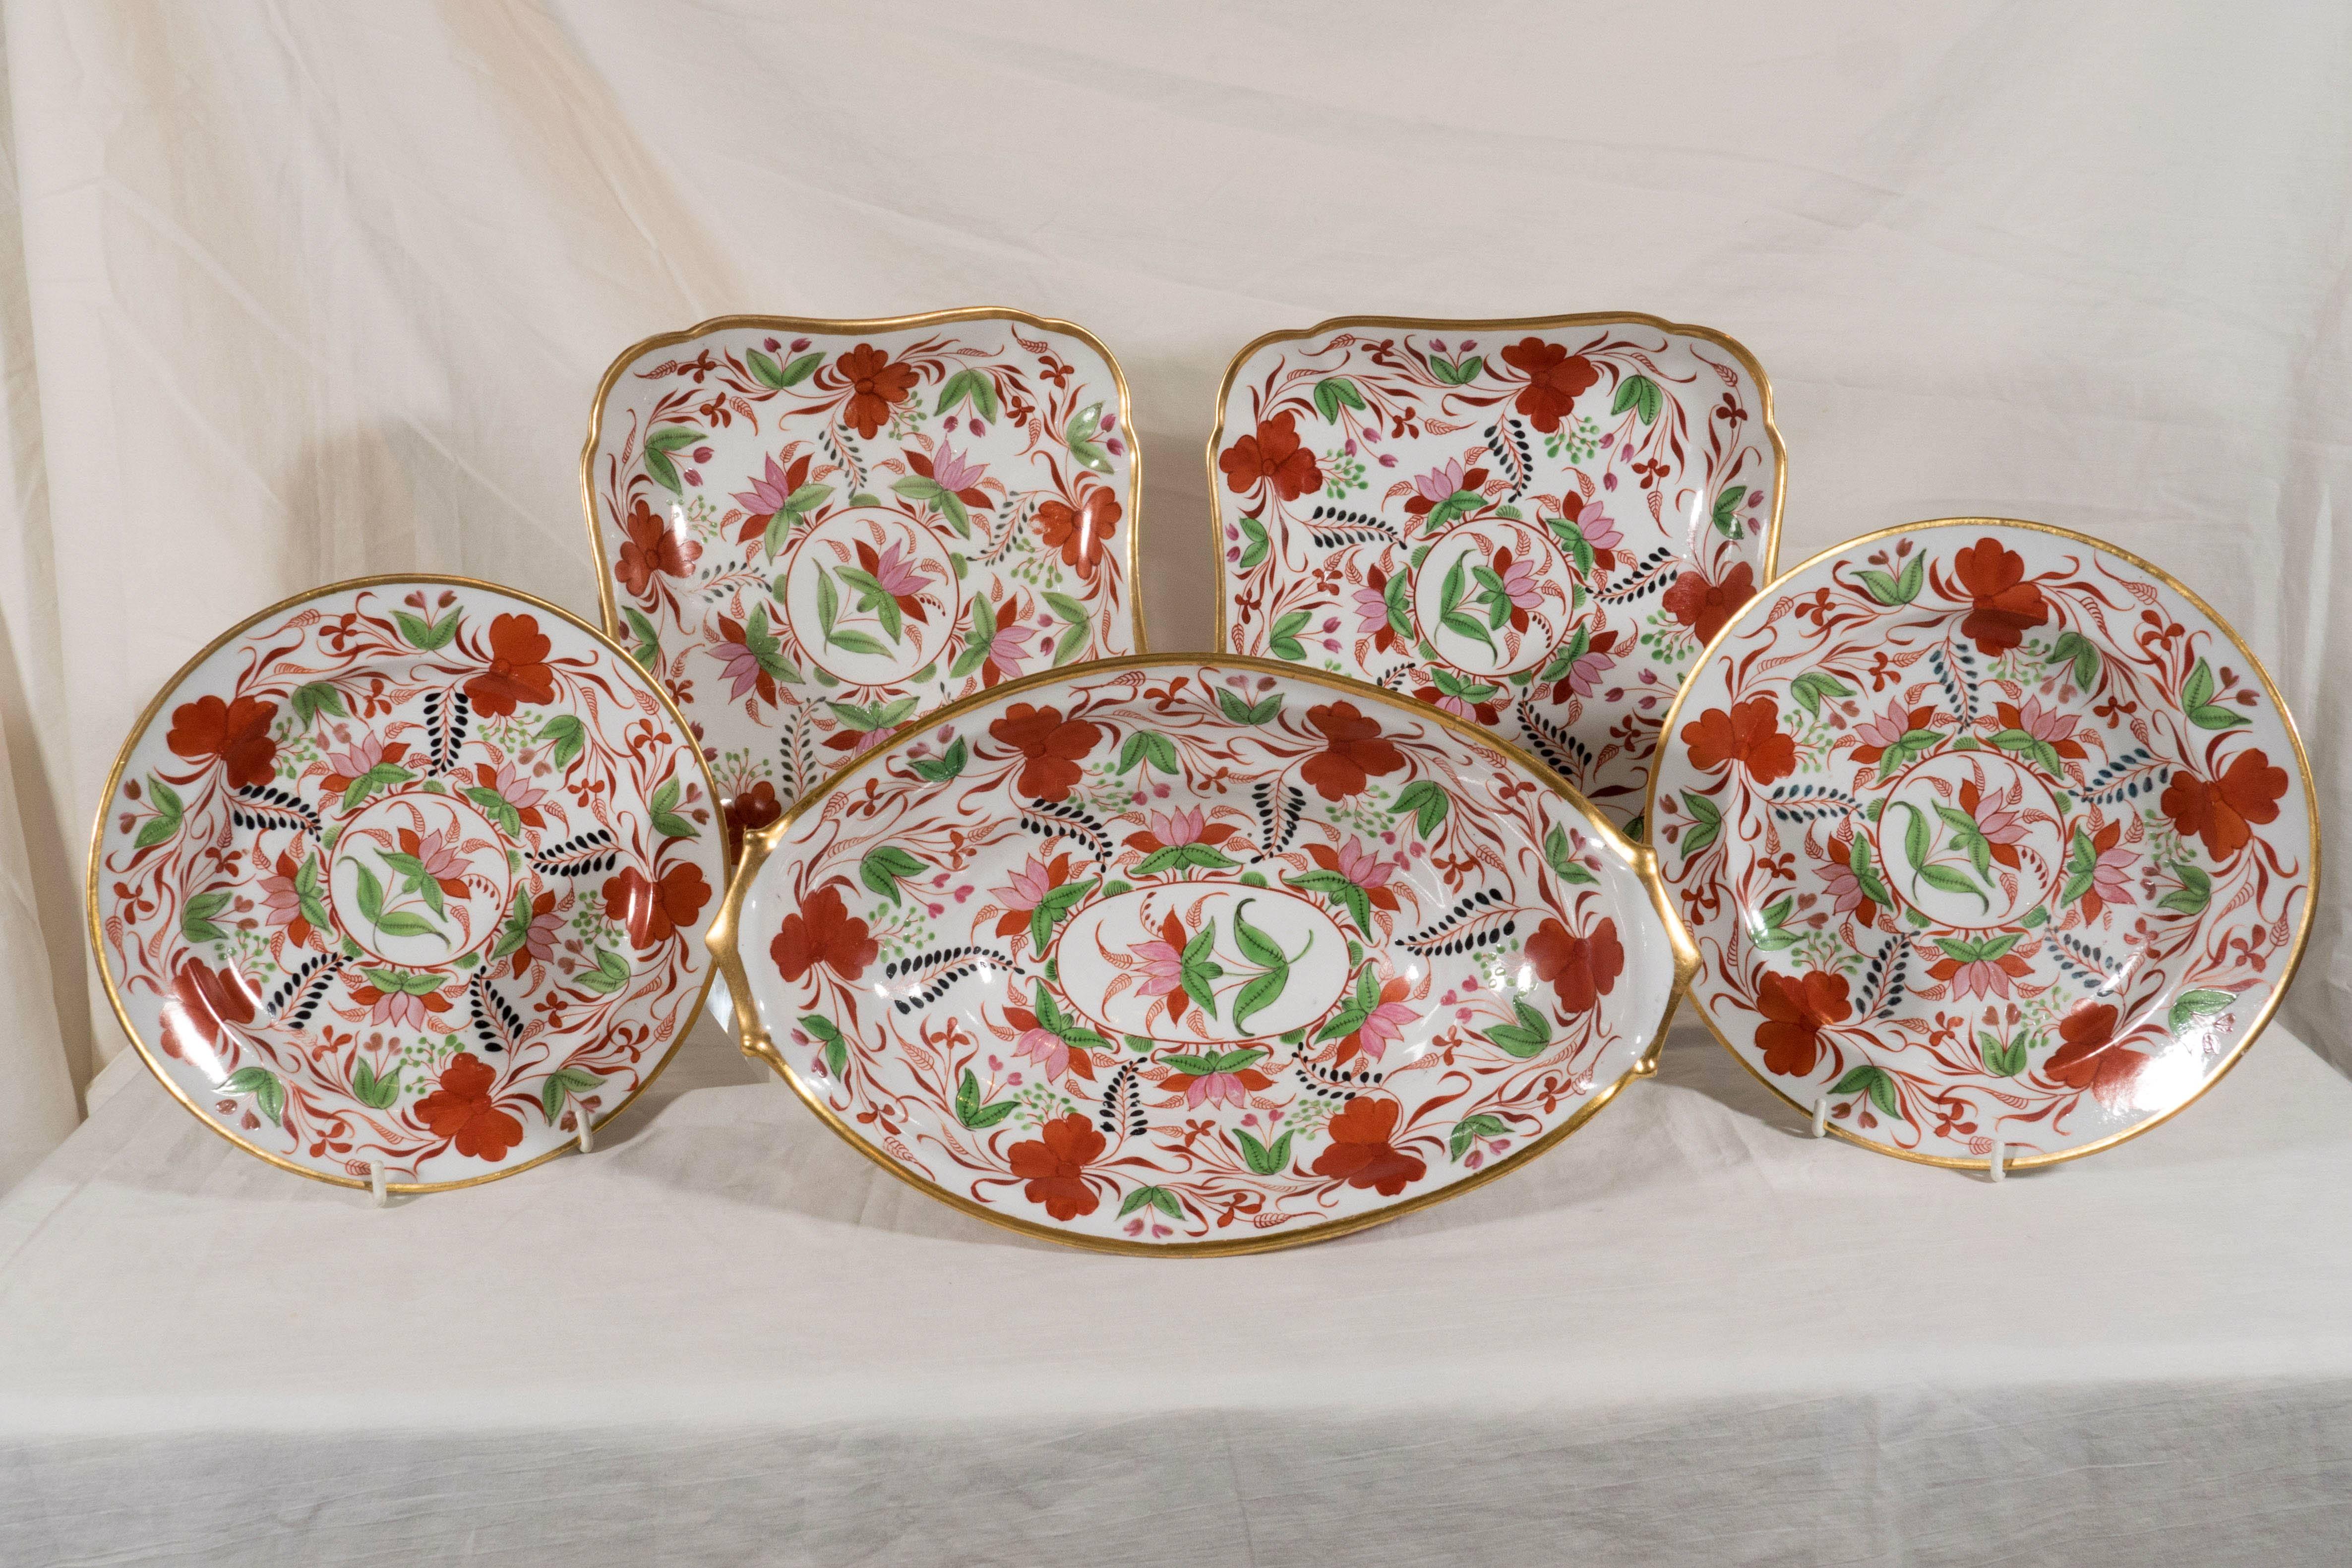 Porcelain Outstanding Group of Miles Mason Dishes in an Extraordinary Overall Pattern